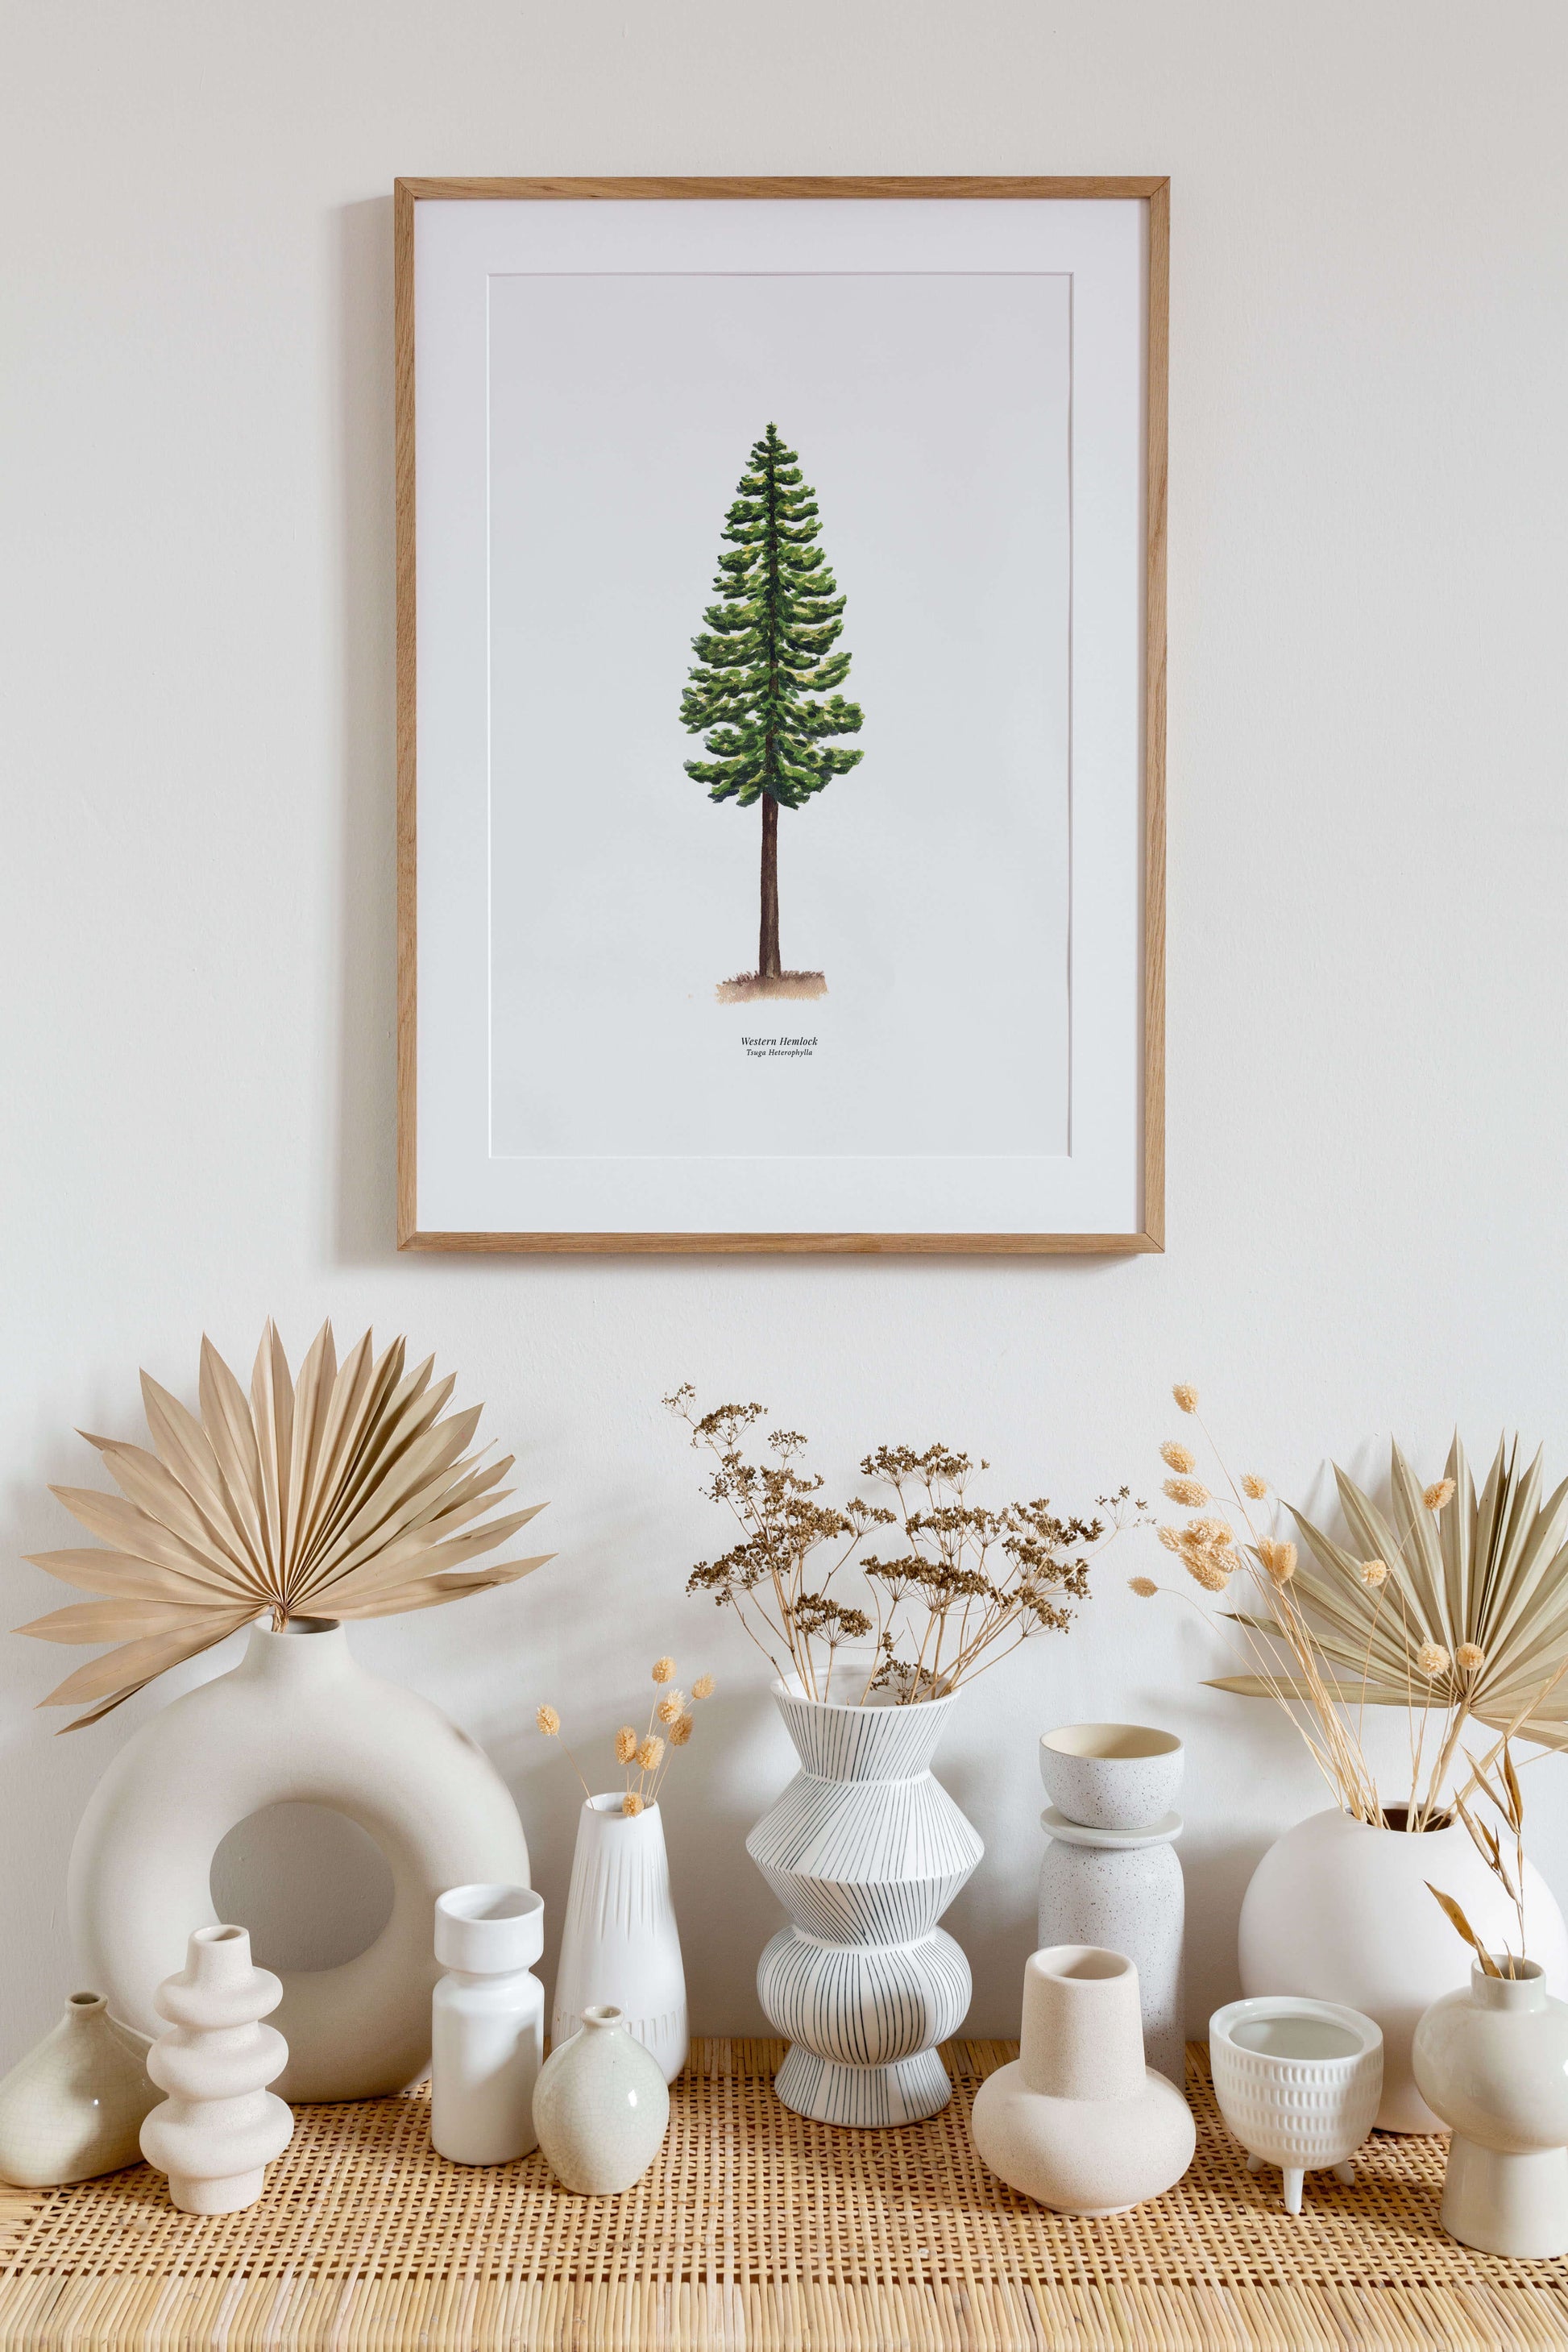 a hand painted picture of a pine tree on a wall